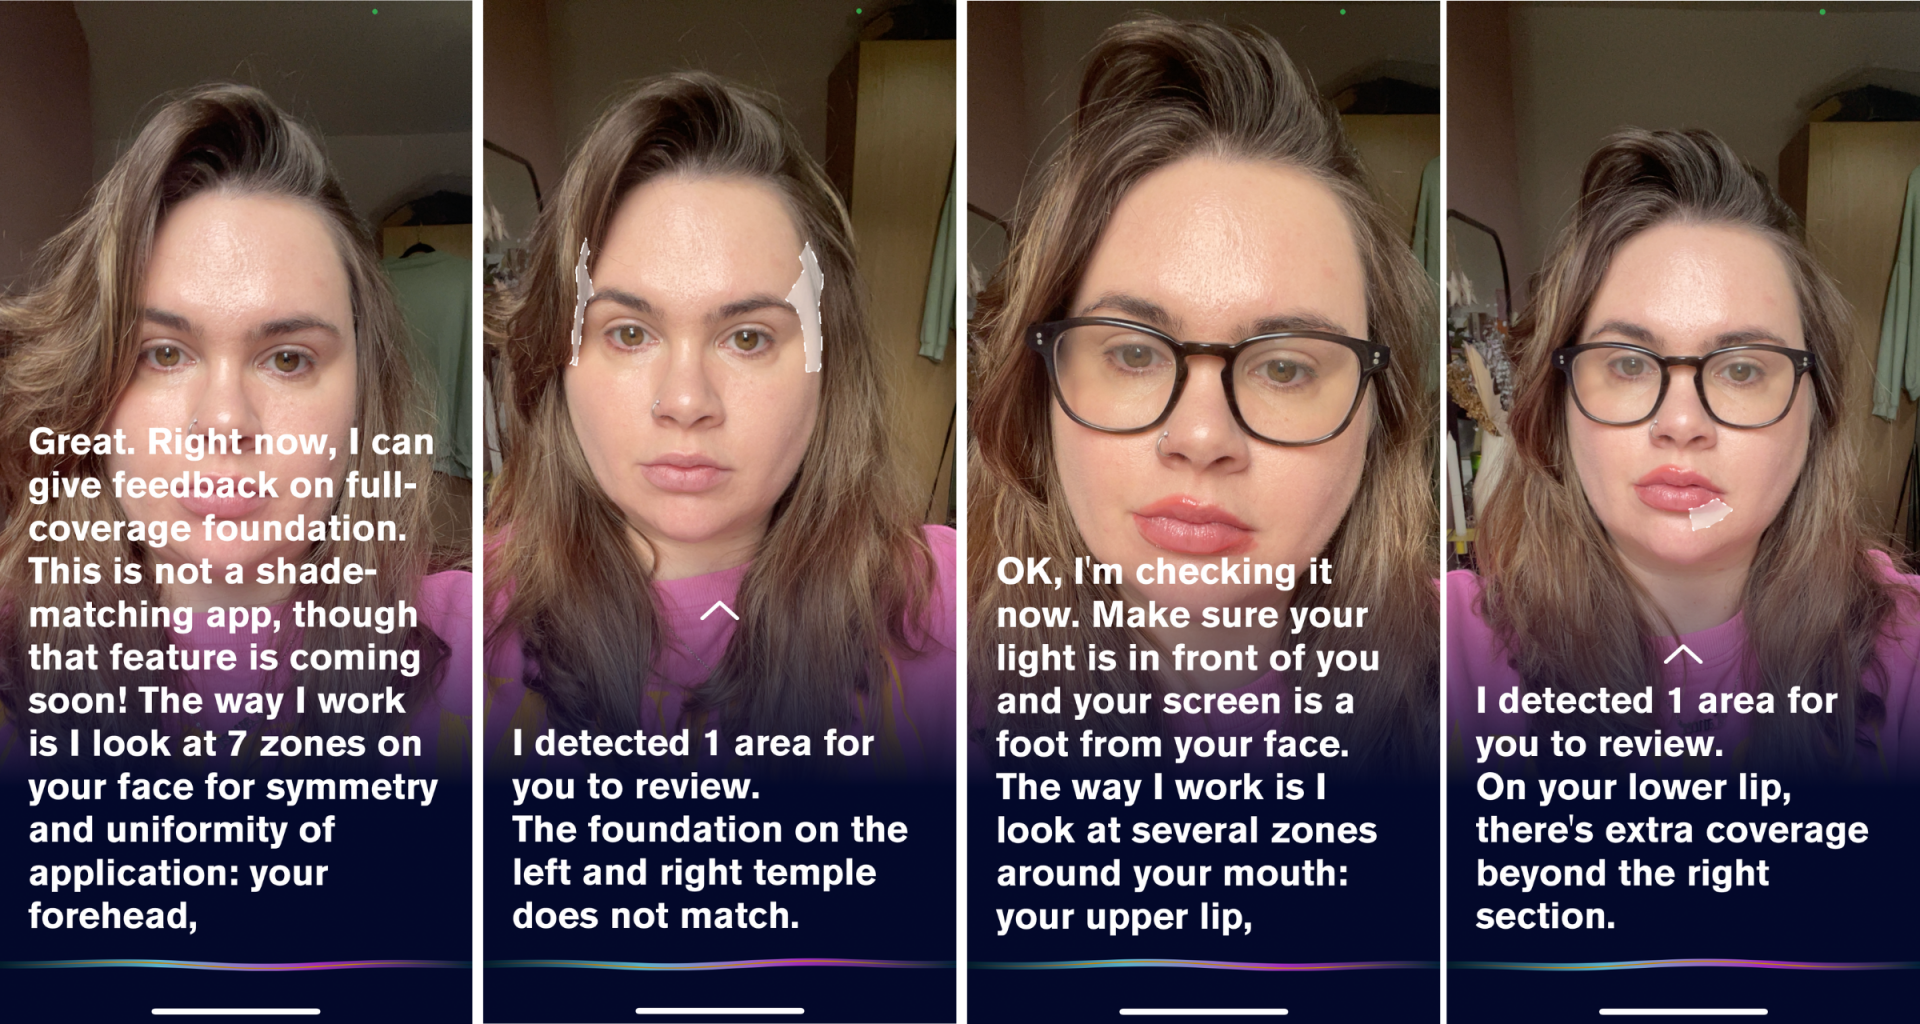 Estée Lauder's new app helps visually impaired users apply makeup